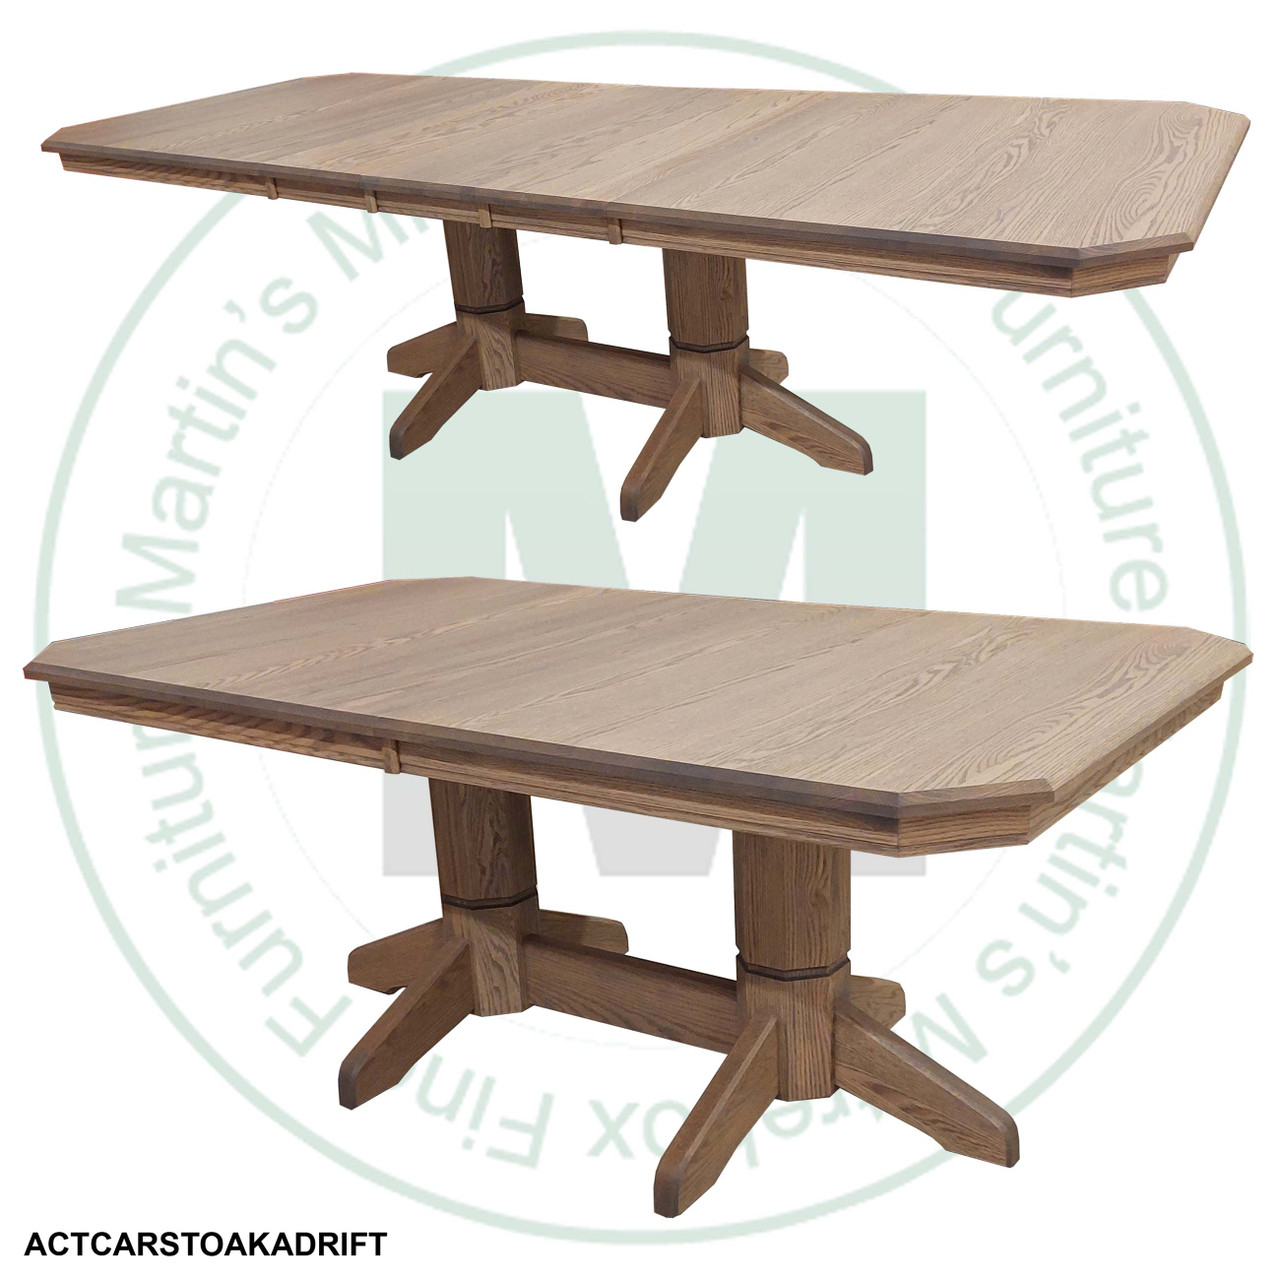 Oak Urban Classic Double Pedestal Table 48''D x 60''W x 30''H With 3 - 12'' Leaves